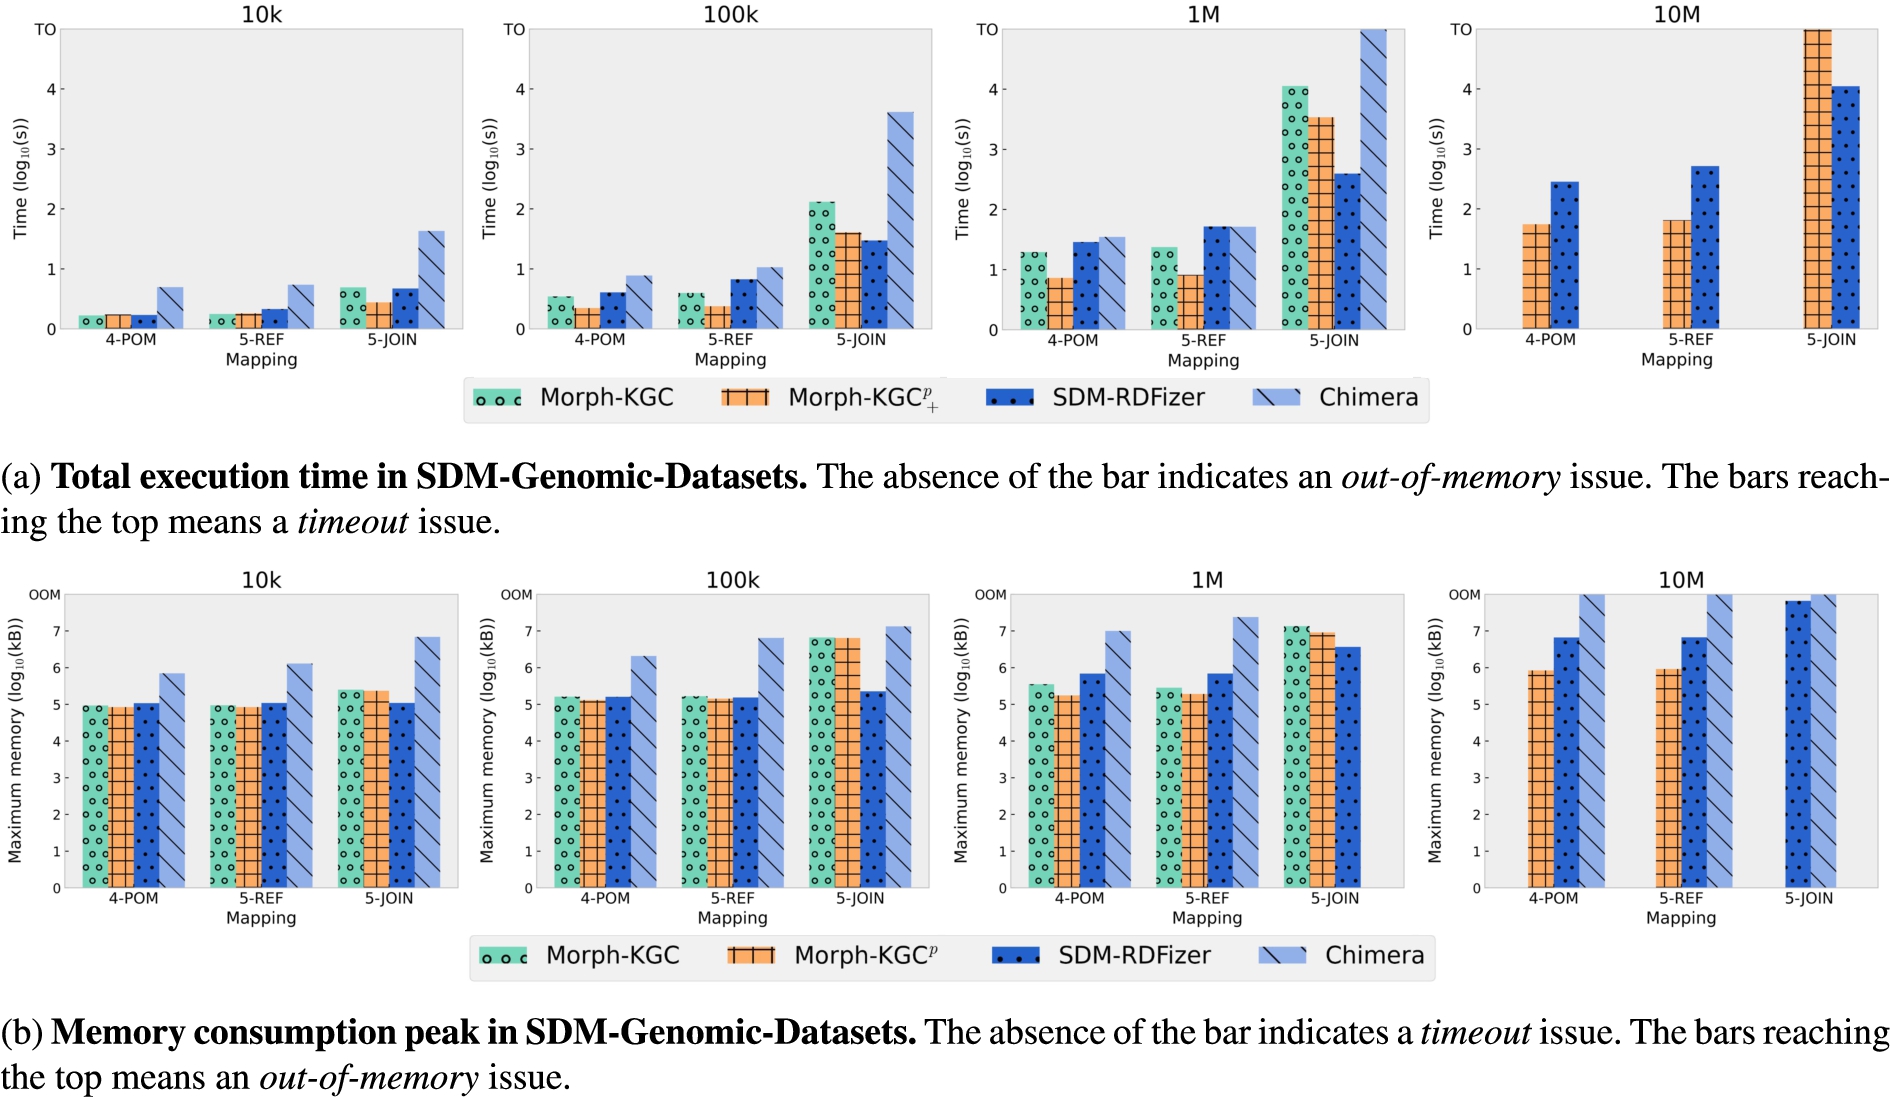 Total execution time and memory consumption peak in SDM-Genomic-Datasets. KGC time in seconds and memory consumption time in kB (logarithmic scale) of the SDM-Genomic-Datasets with data scale factors 10K, 100K, 1M and 10M rows.